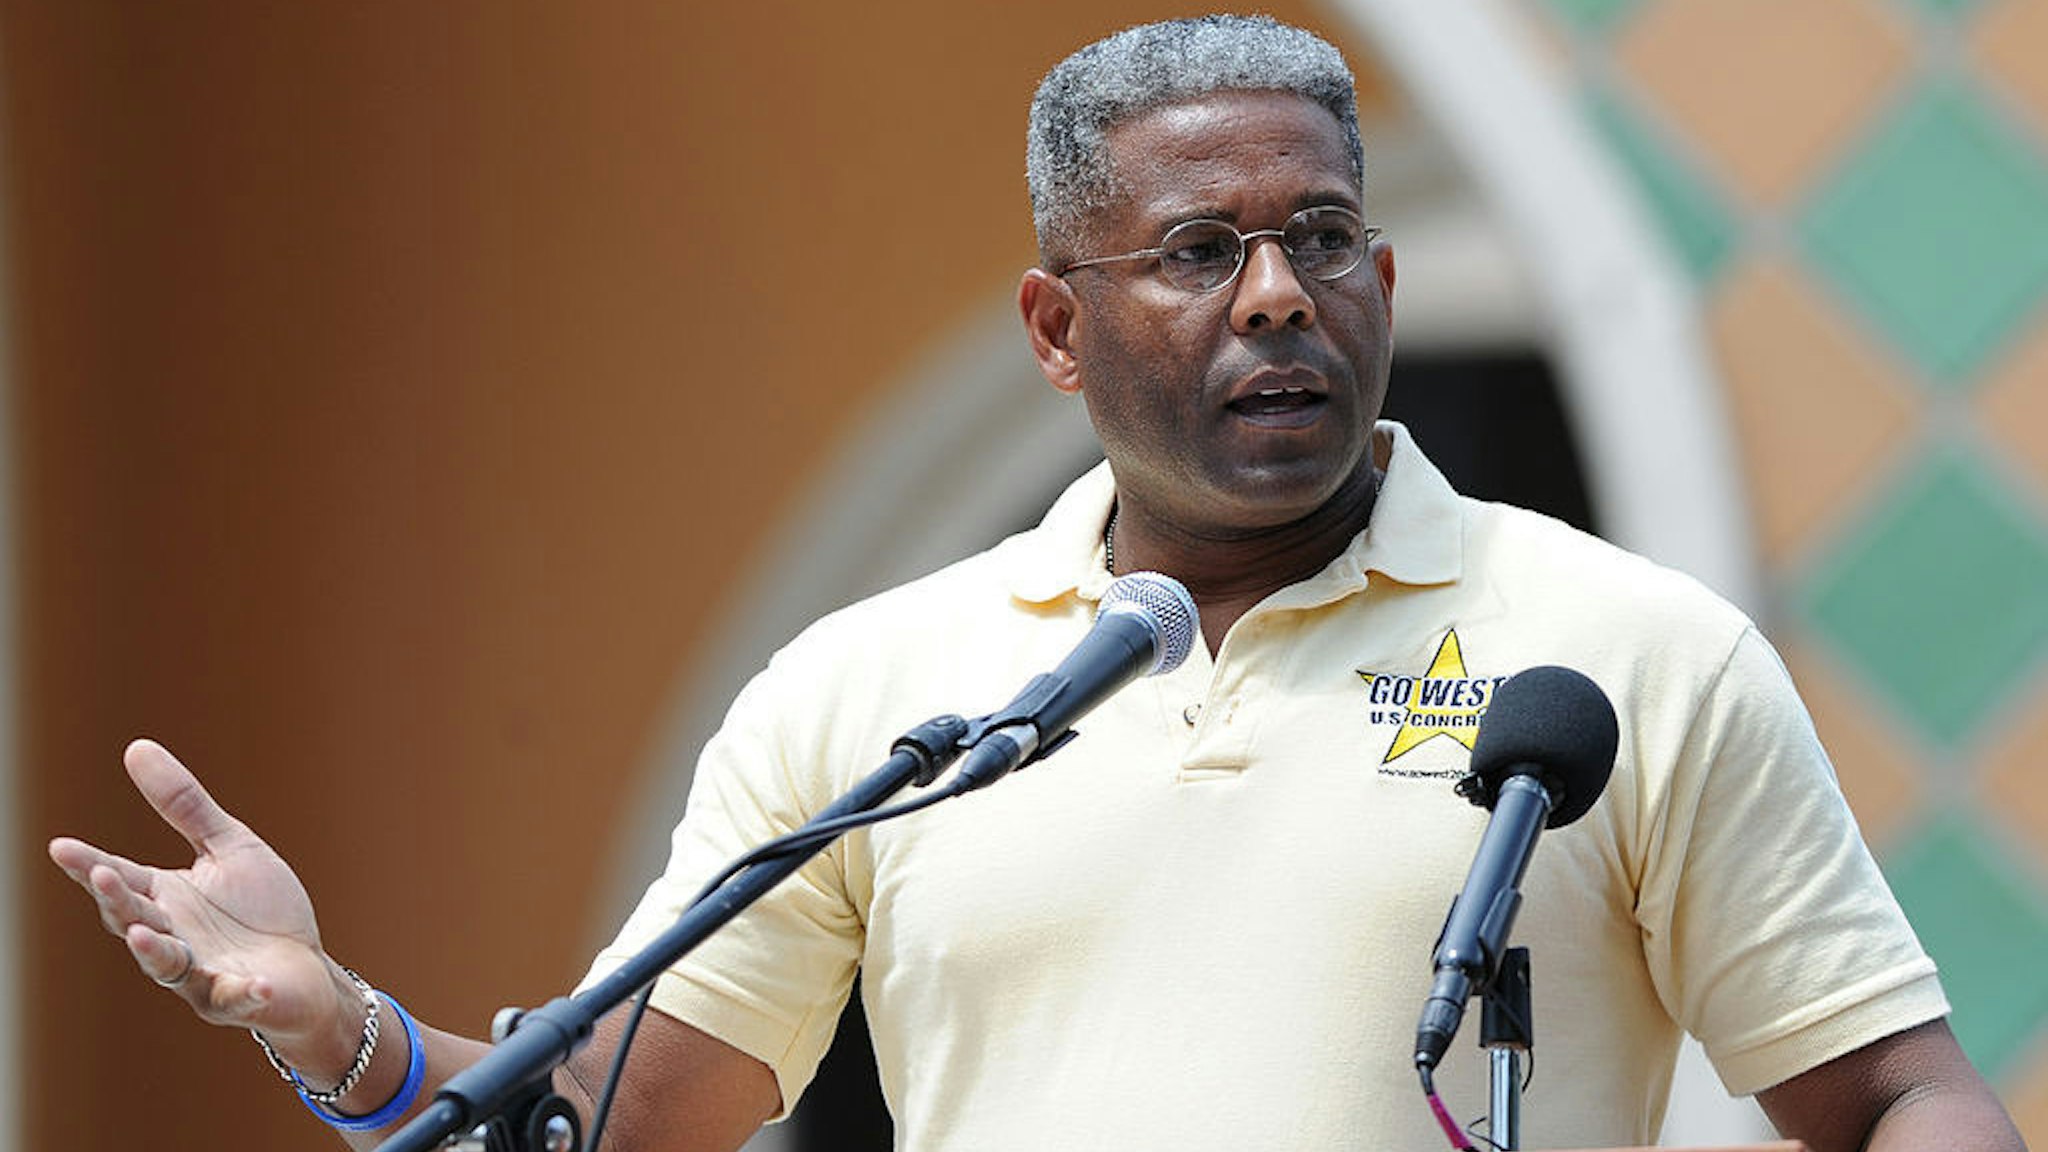 BOCA RATON, FL - APRIL 16: Congressman Allen West attends South Florida Tax Day Tea Party Rally on April 16, 2011 in Boca Raton, Florida. (Photo by Larry Marano/Getty Images)